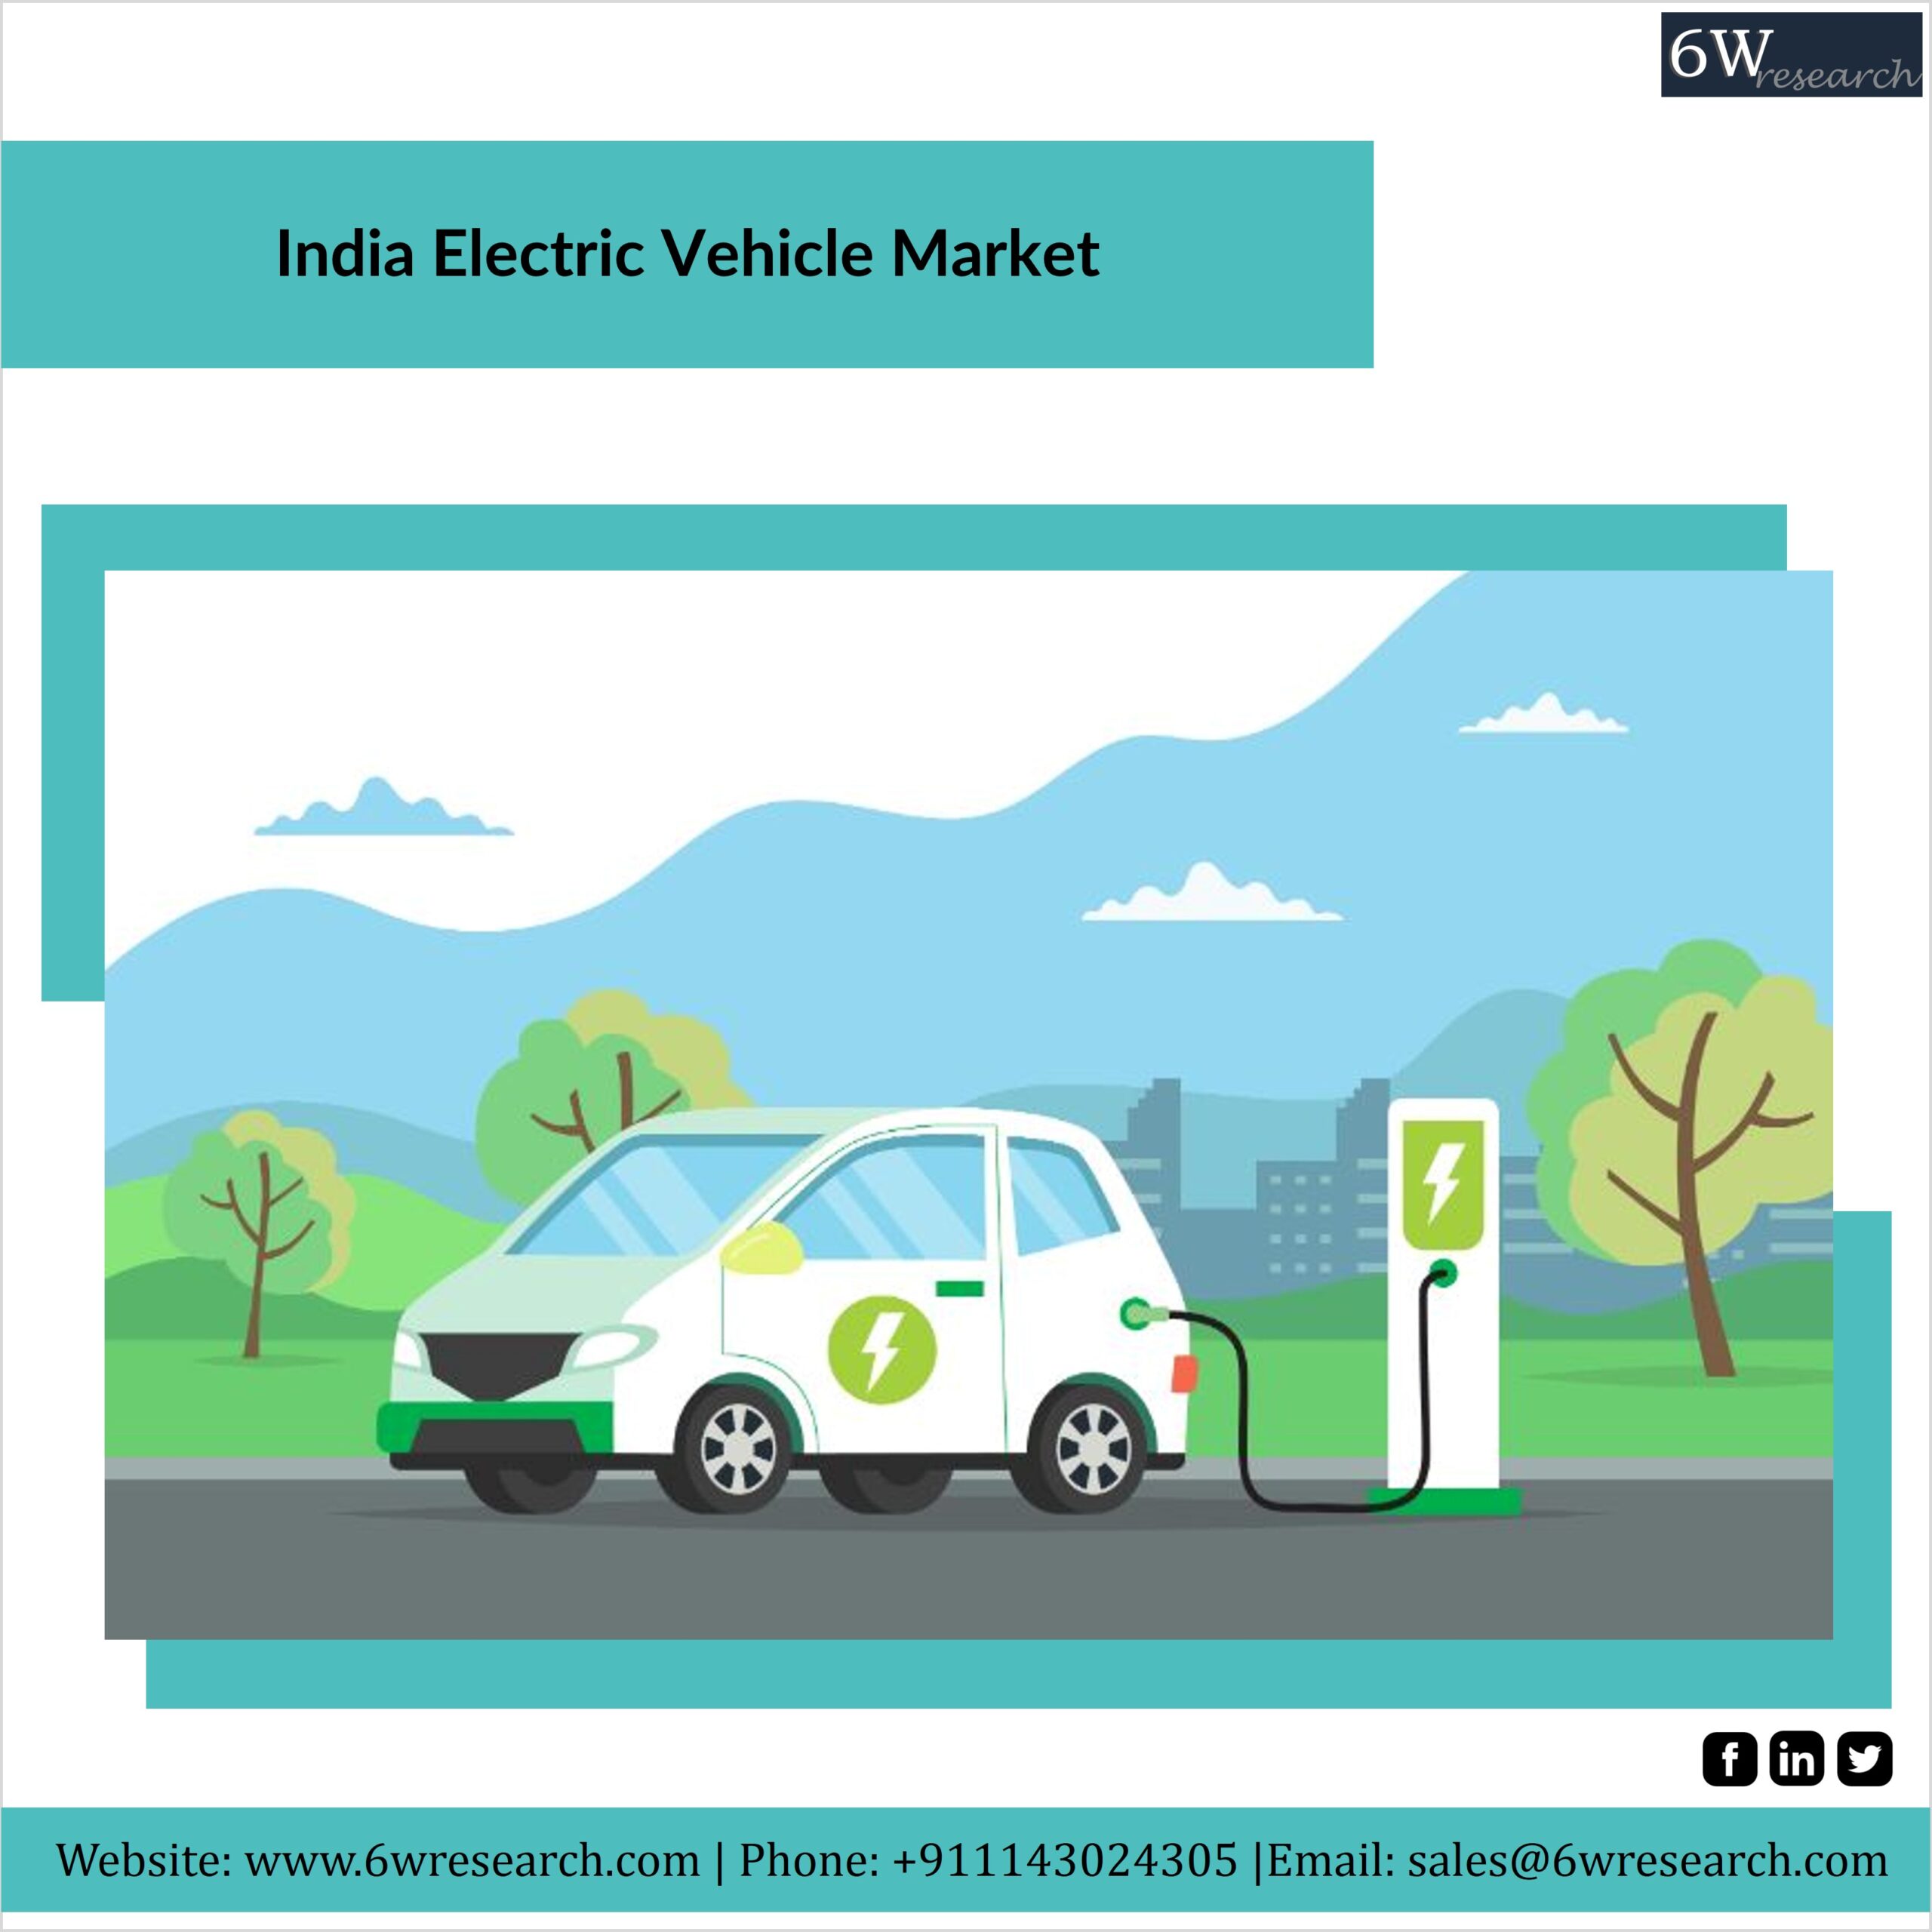 Analysis of India Electric Vehicle Market (20202025) Growth, Size